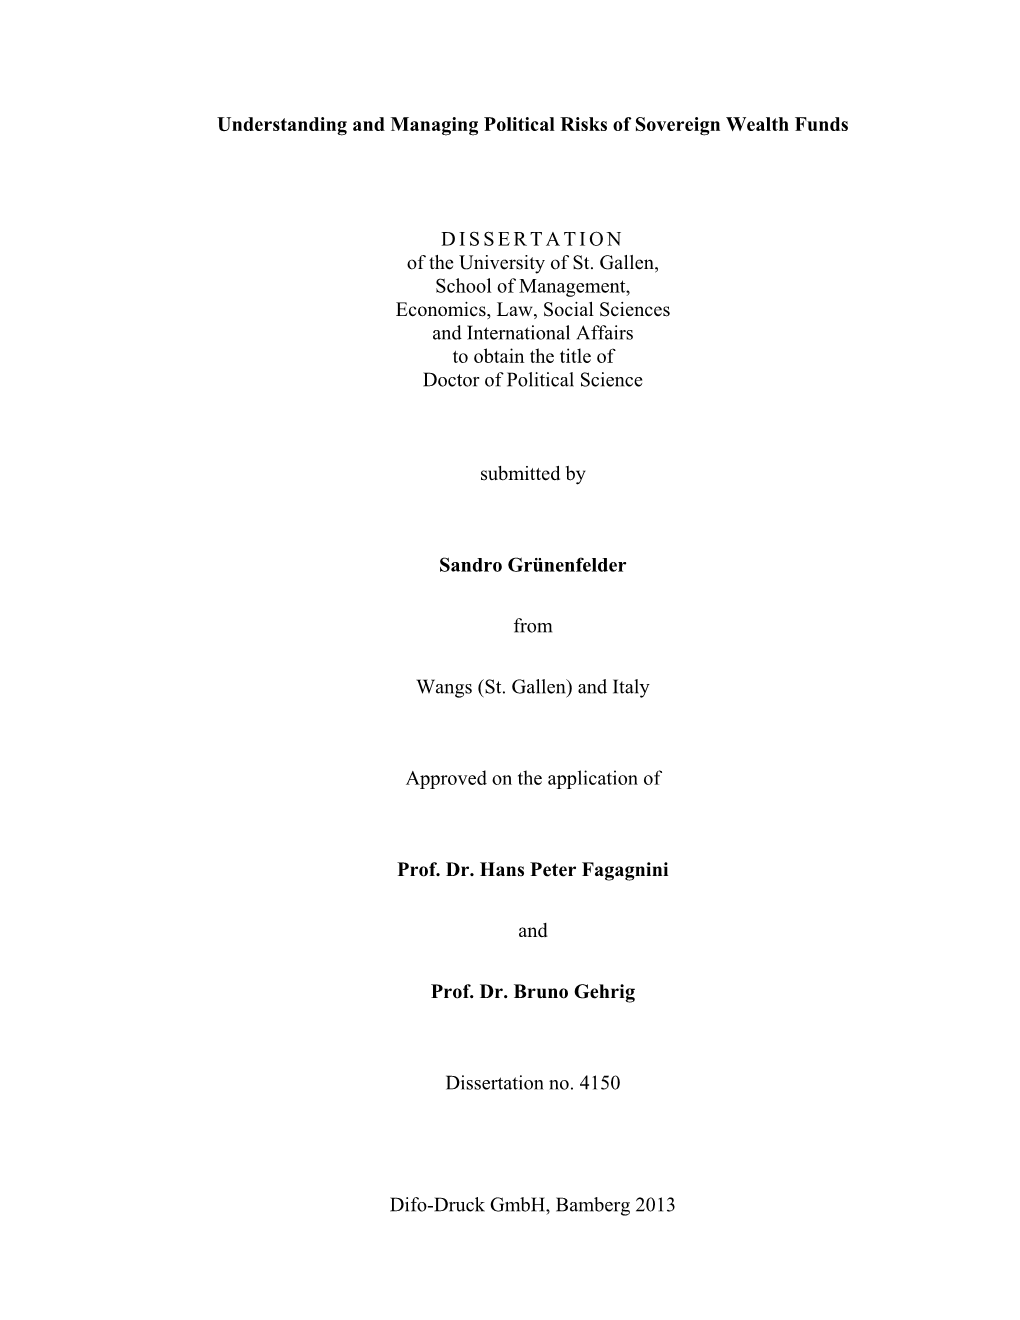 Understanding and Managing Political Risks of Sovereign Wealth Funds DISSERTATION of the University of St. Gallen, School Of